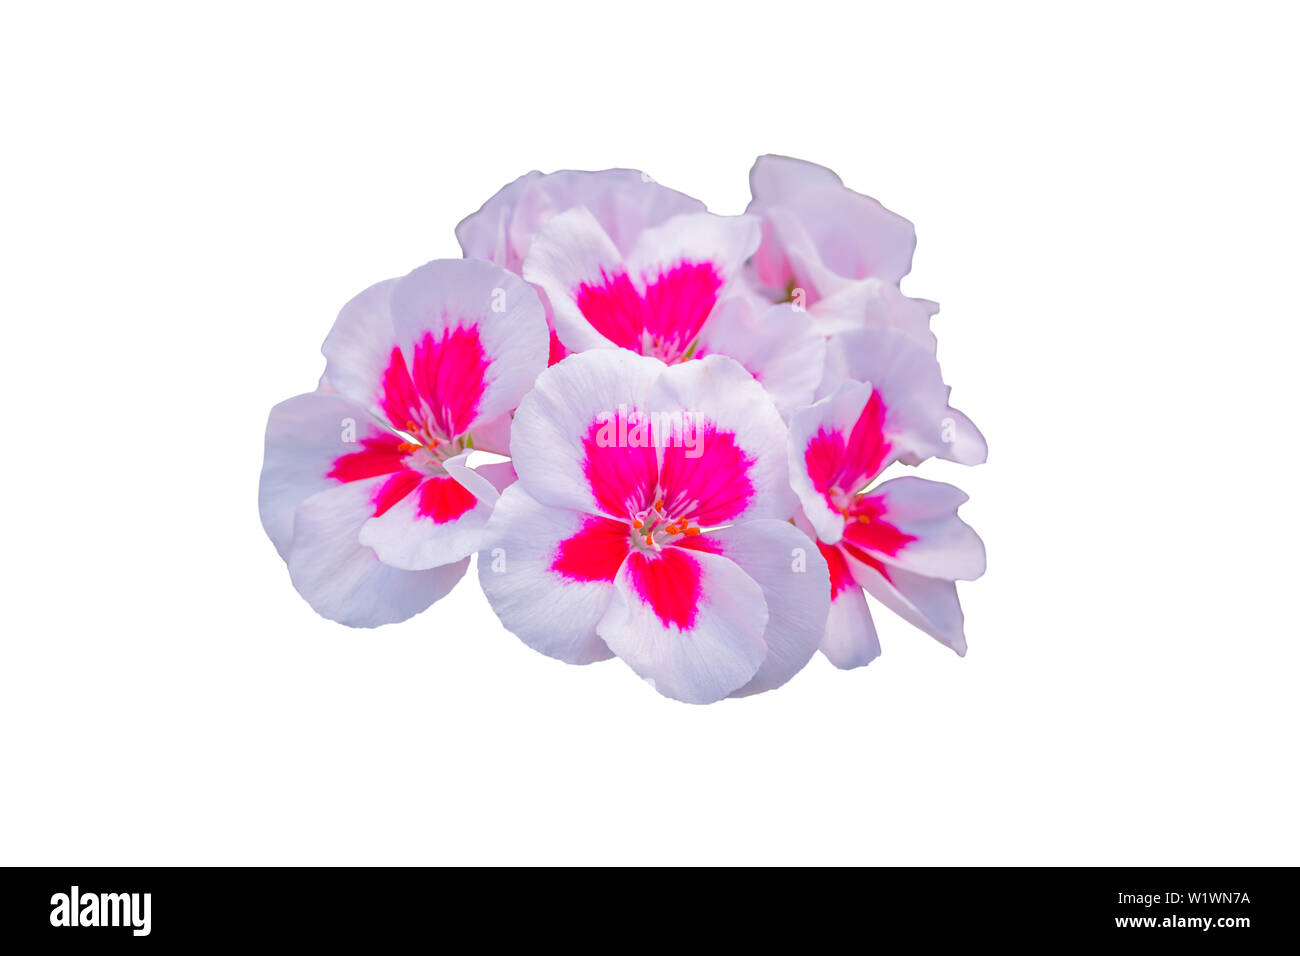 Impatiens walleriana white and pink flowers on white background. Stock Photo